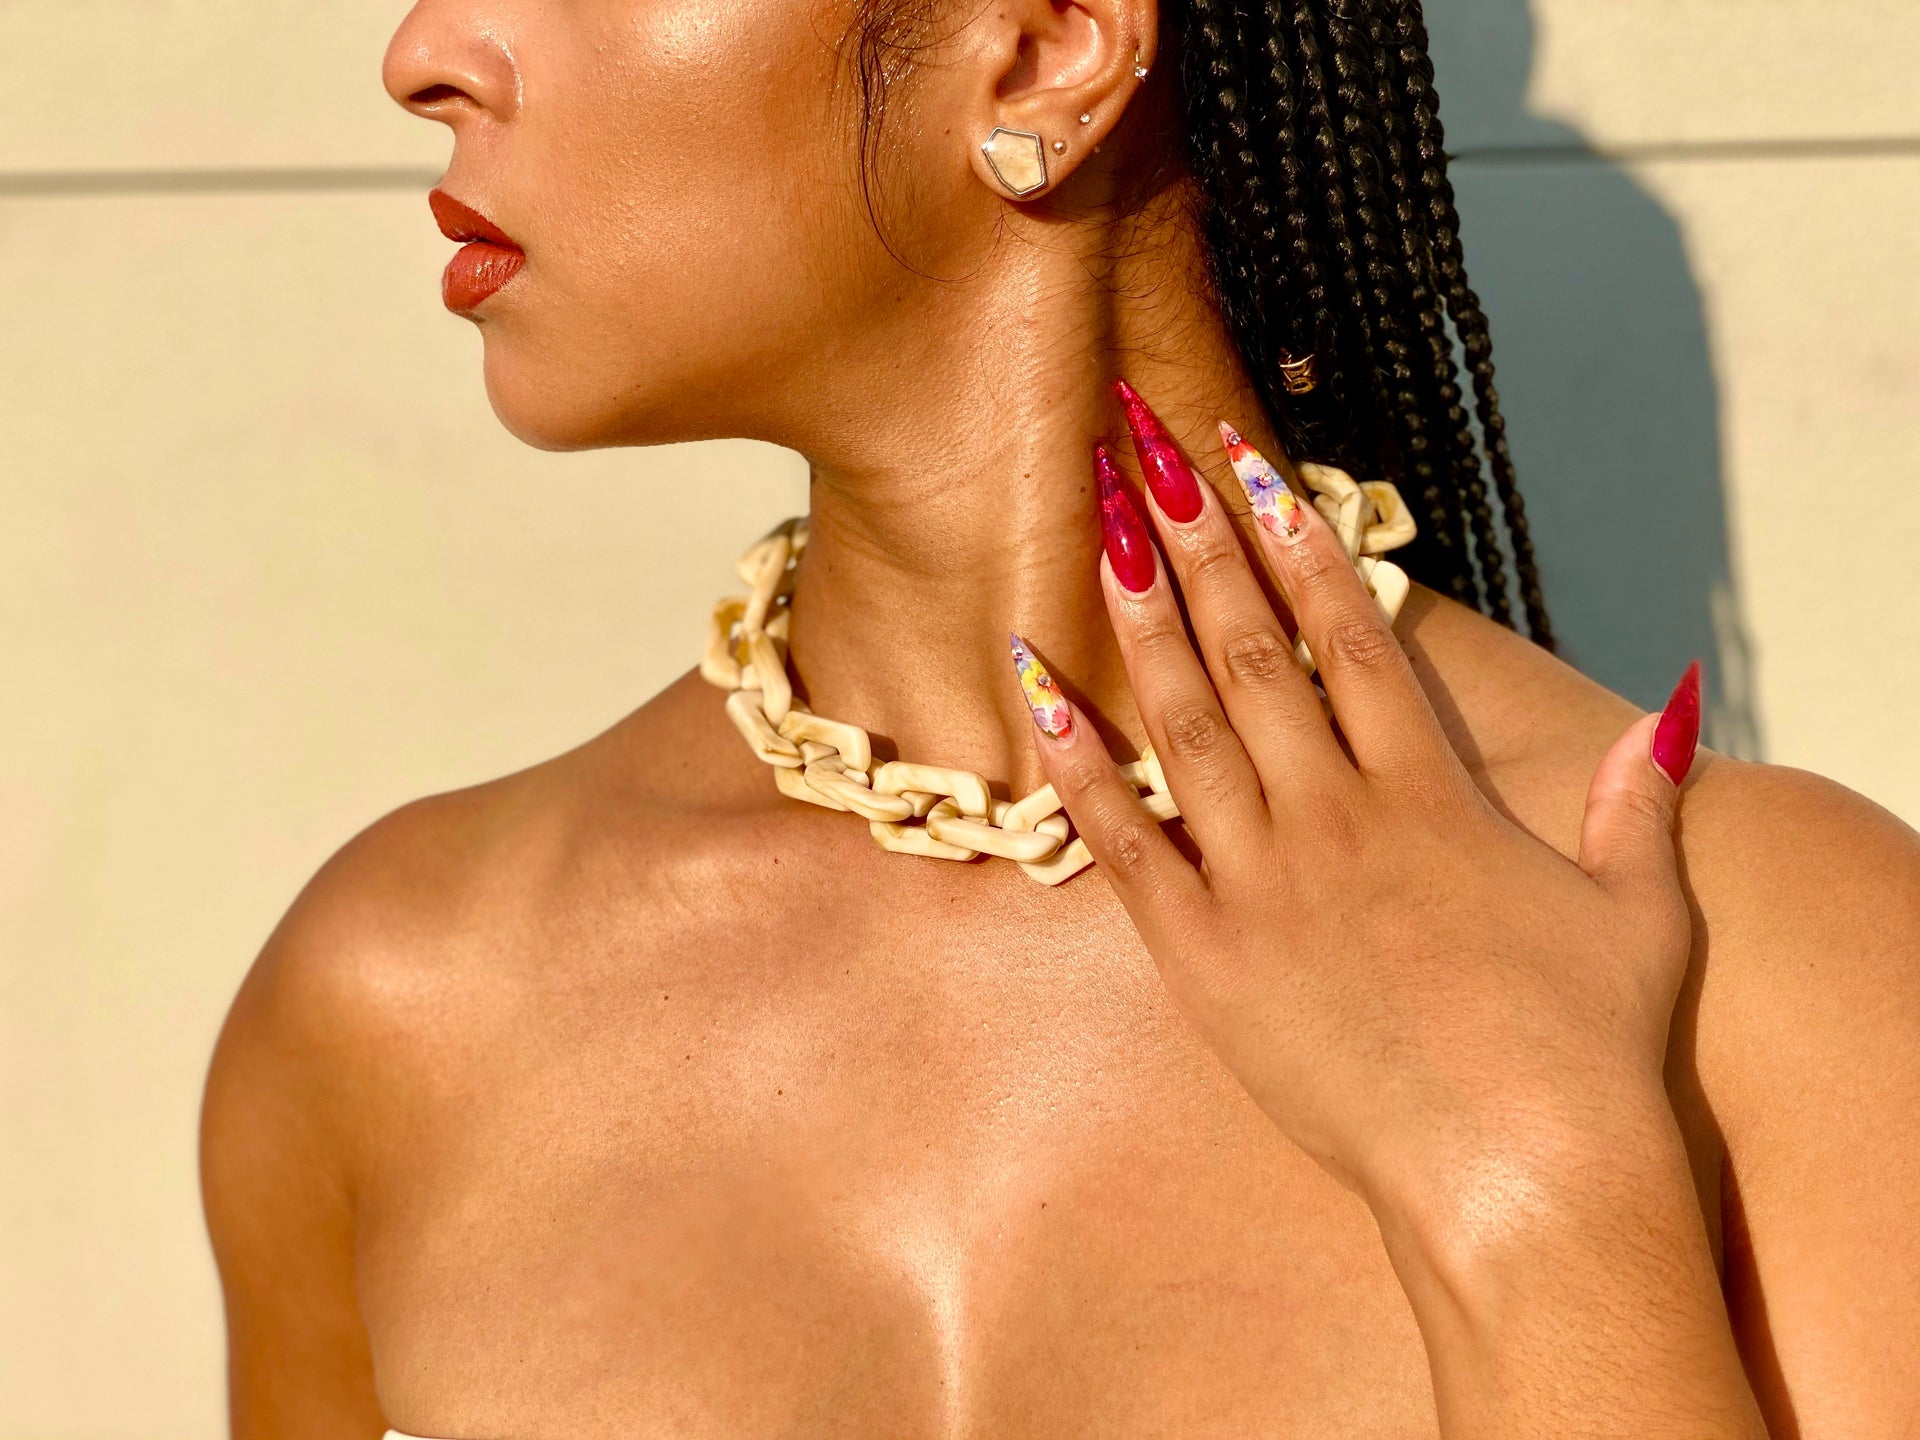 The “Nude Marble” Chocker necklace